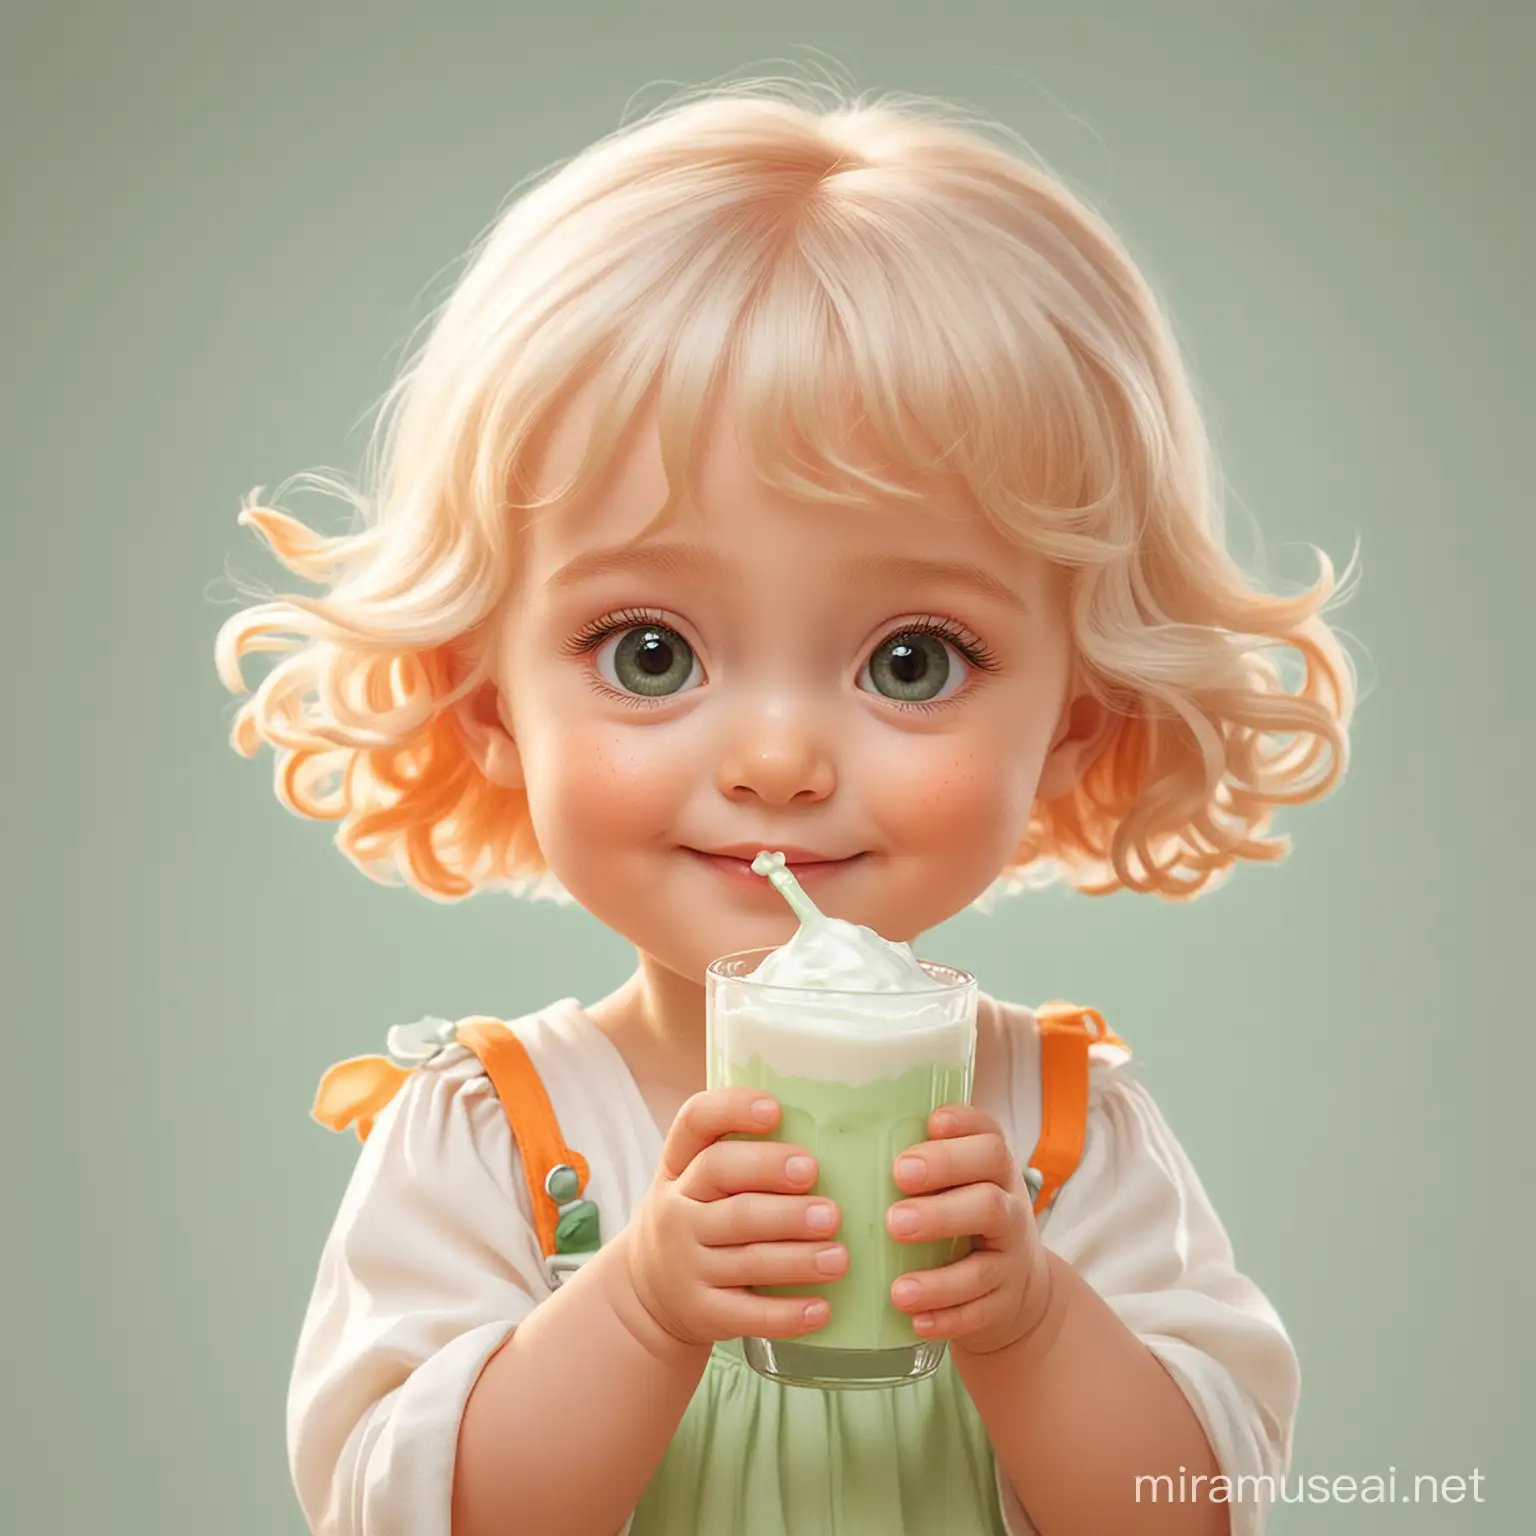 Child Holding Kefir Disney Style Animation with Pastel Colors